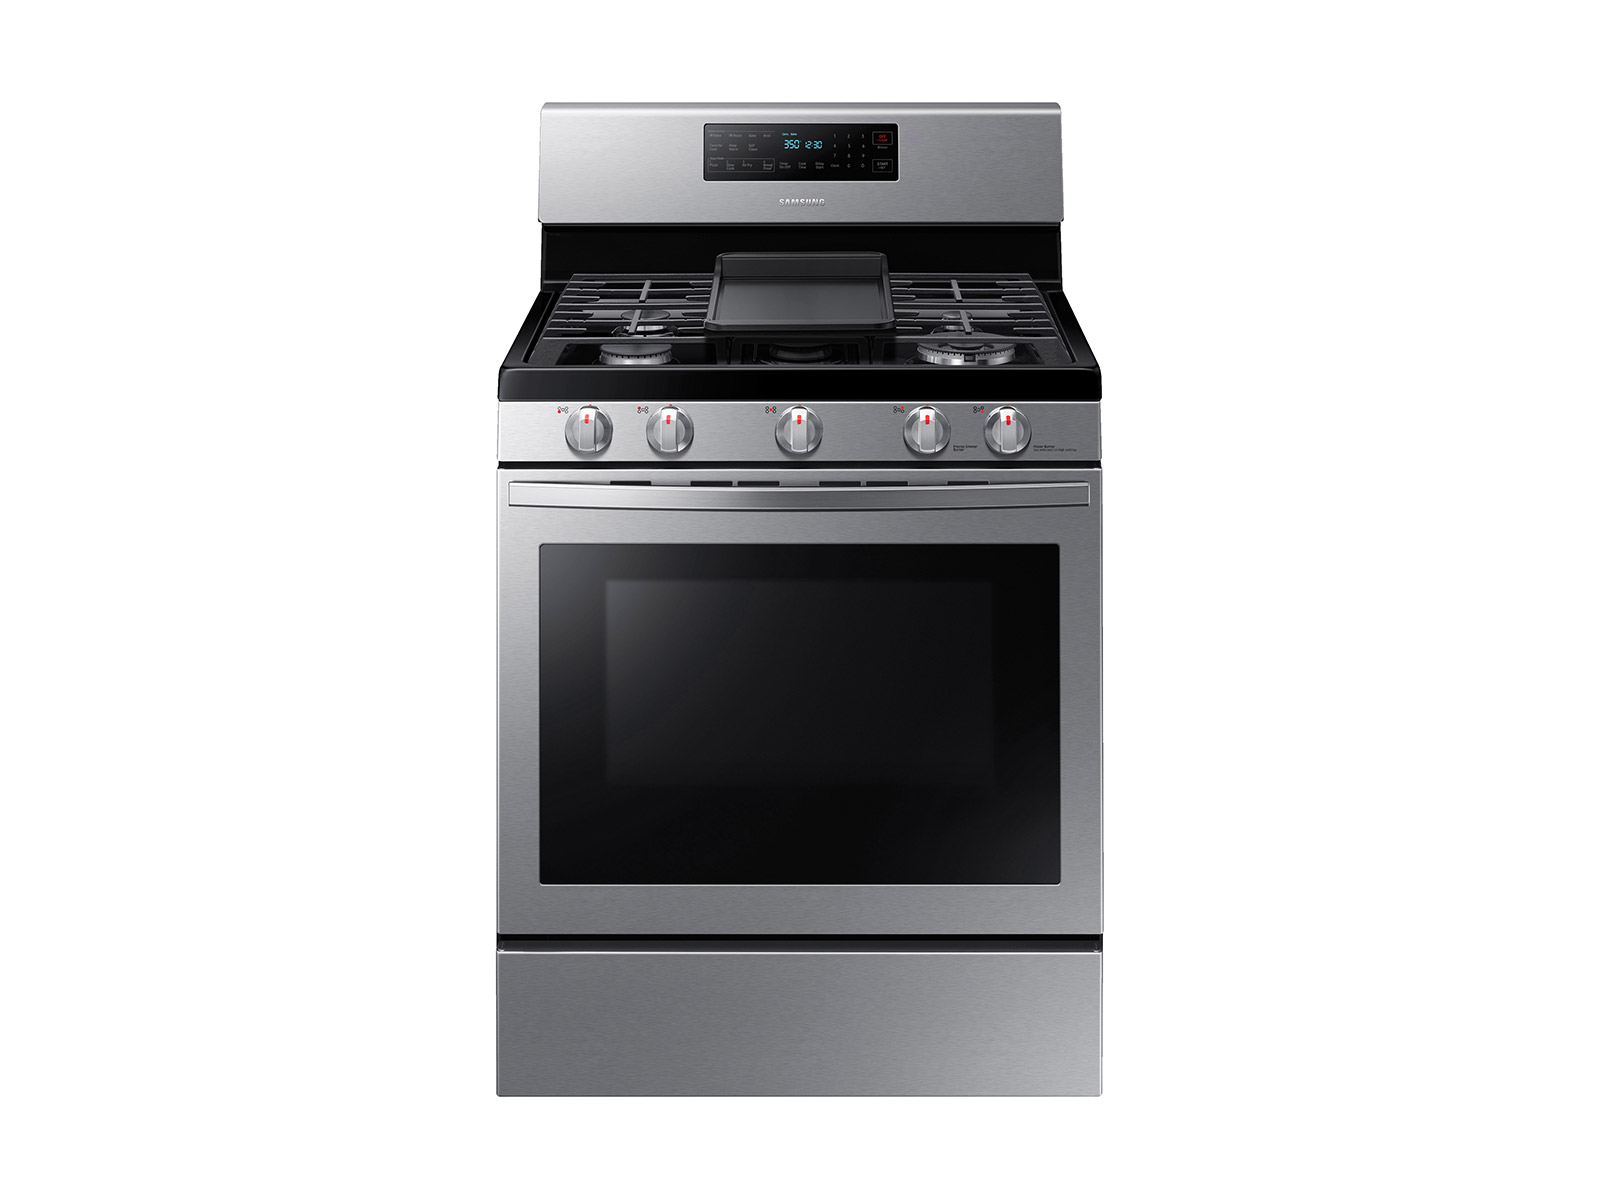 Larger View of 5.8 cu. ft. Freestanding Gas Range with Air Fry and Convection in Stainless Steel